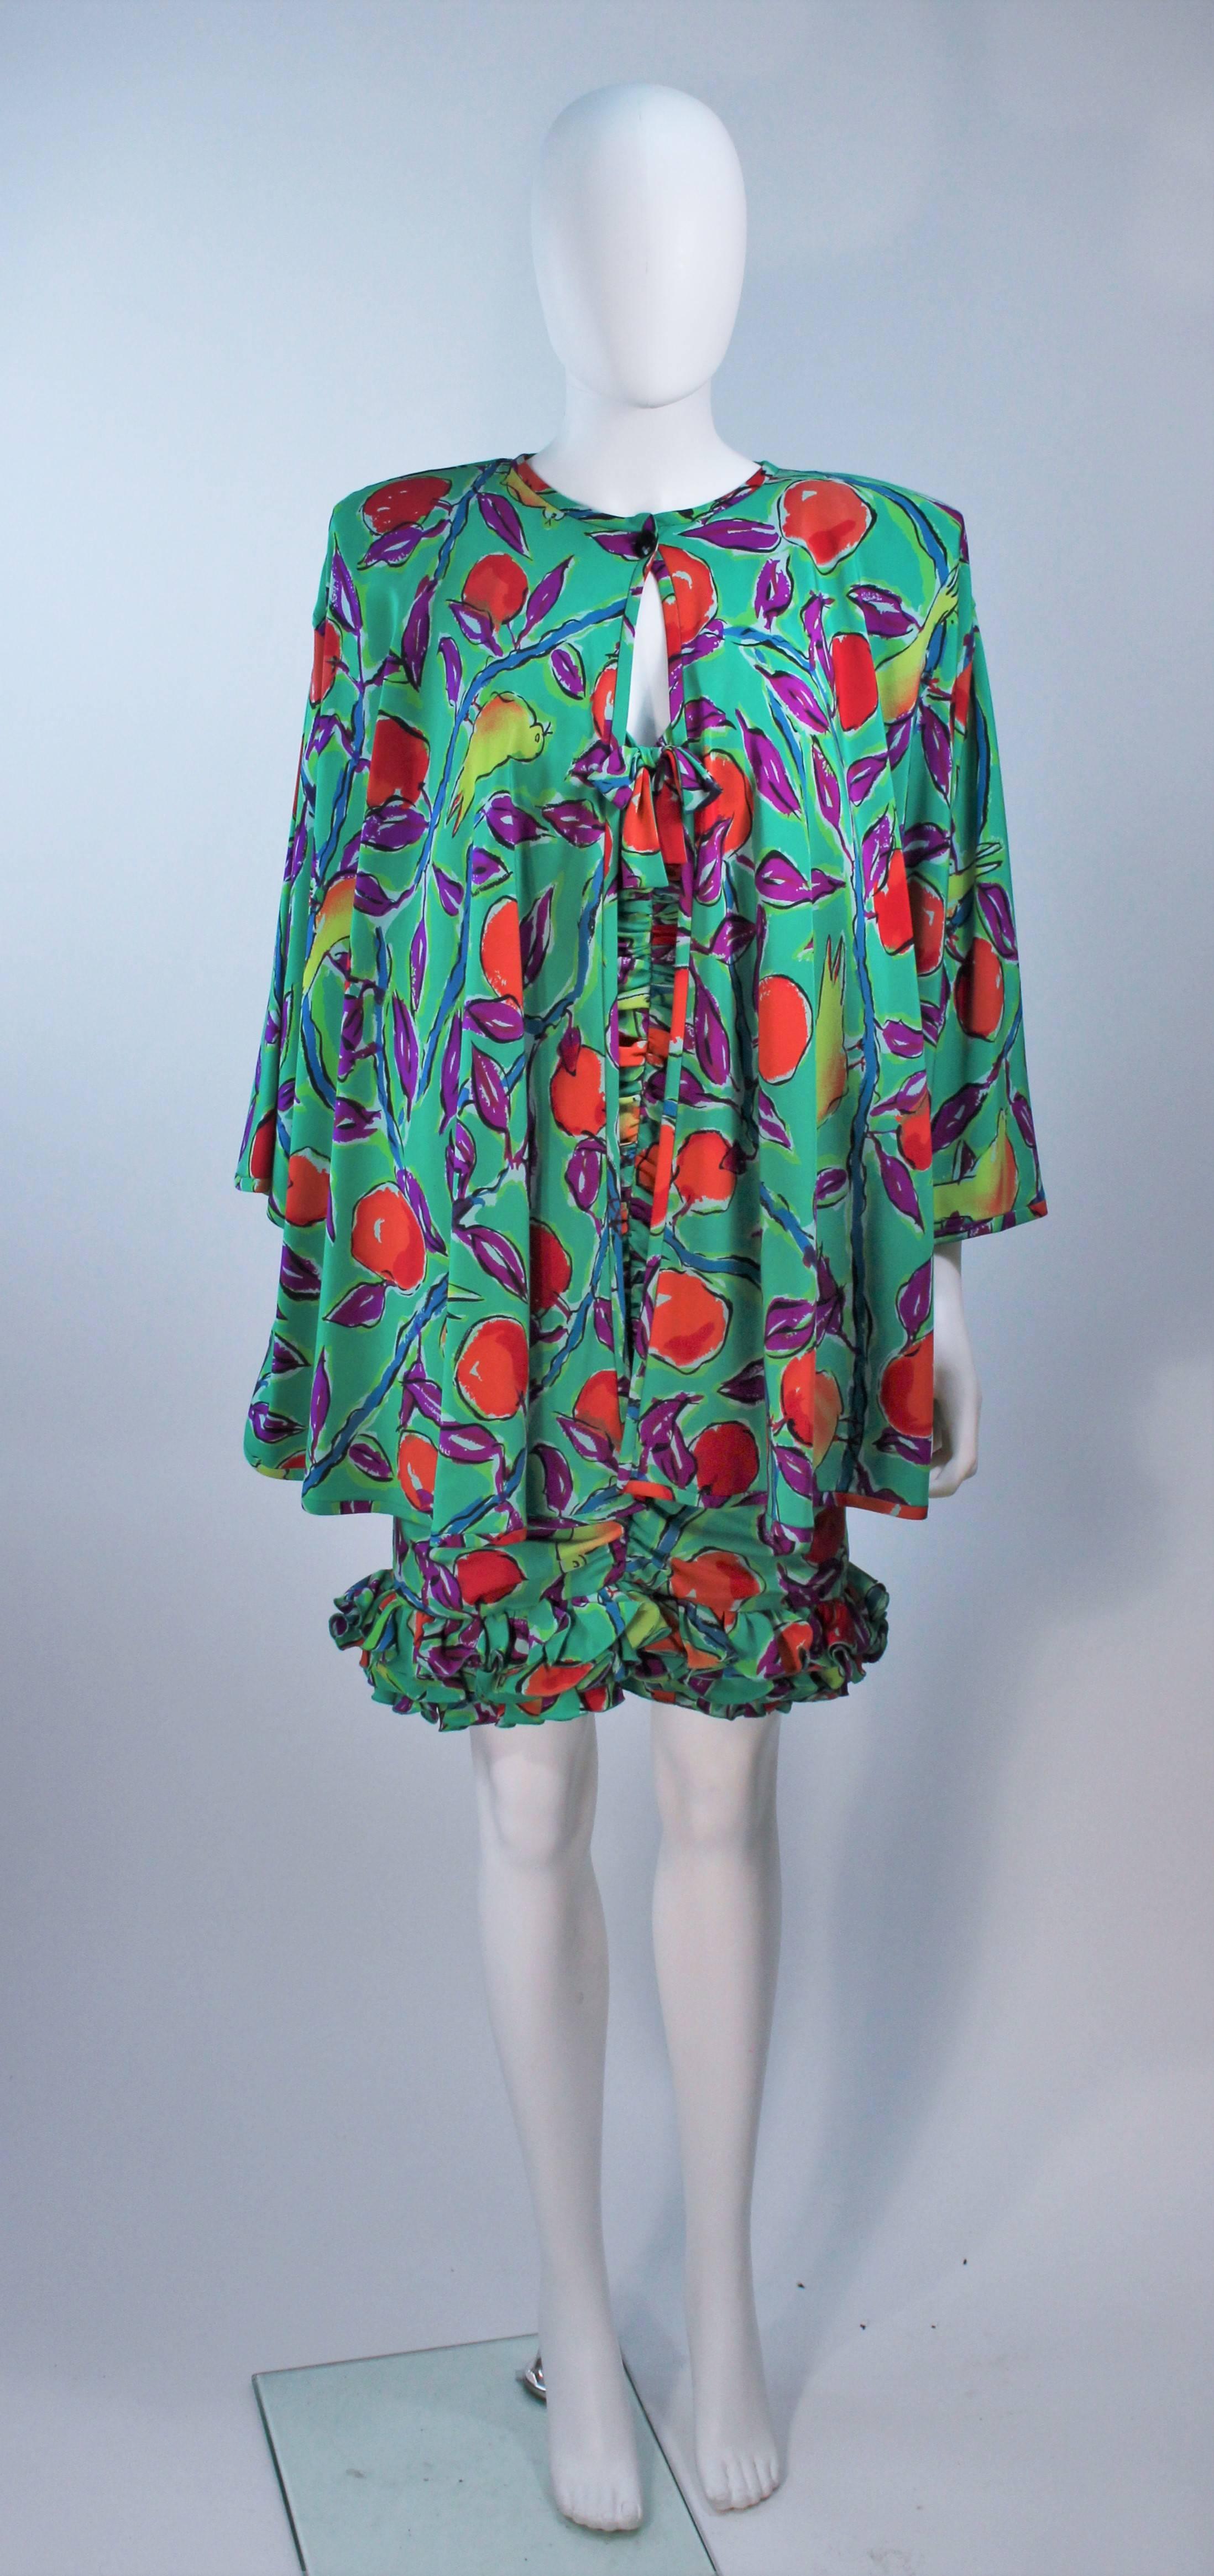  This Emanuel Ungaro set is composed of a printed teal silk with a floral and bird motif. The cocktail dress features a center front box and ruffled hem. The jacket has a hook and eye closure with a black faceted button closure. In excellent vintage